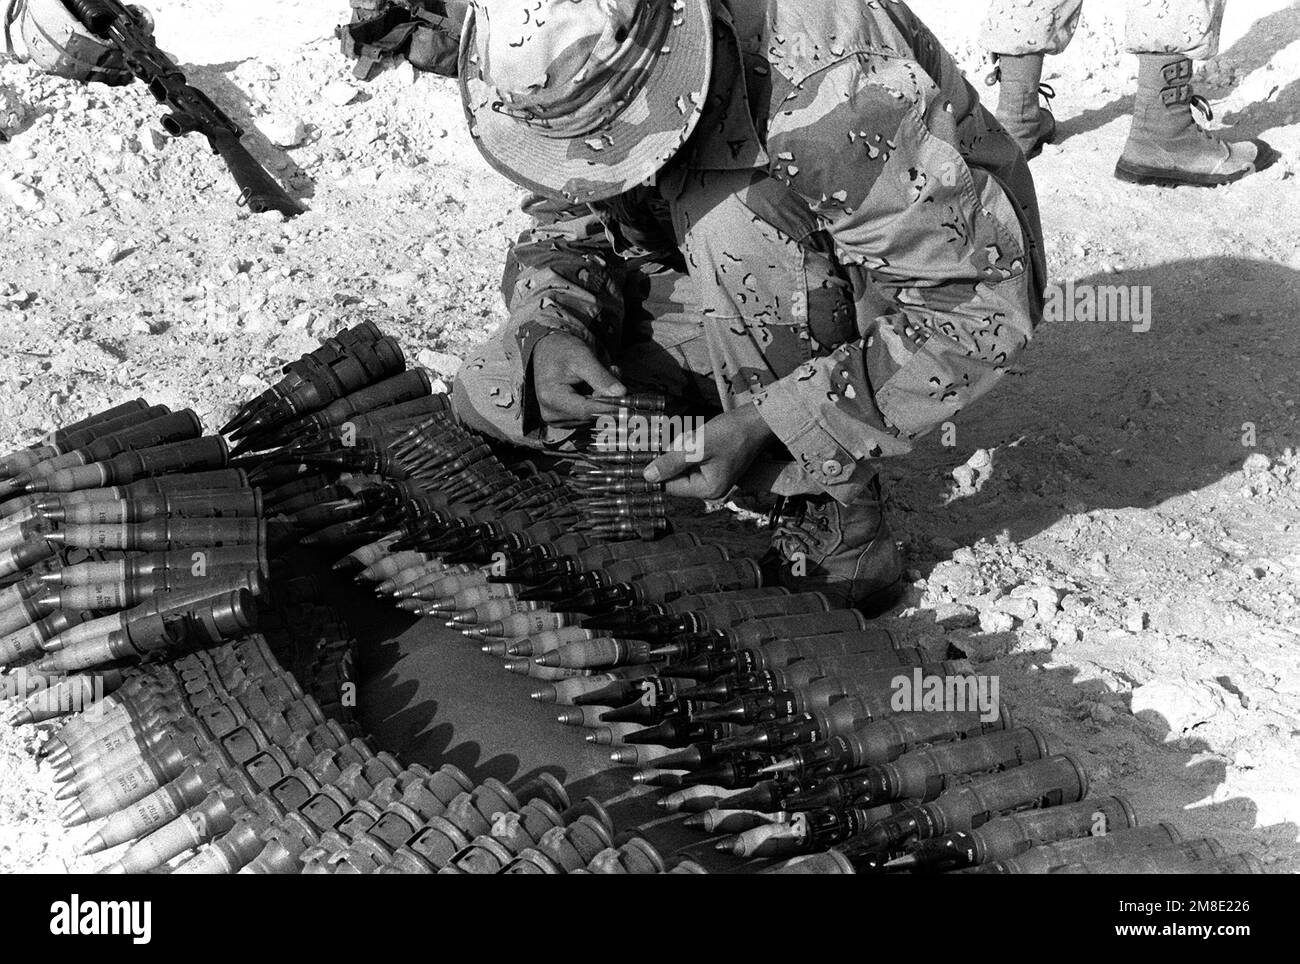 PFC R. Thompson of Company C, 1ST Light Armored Infantry (LAI) Battalion, lays out a belt of 7.62mm machine gun ammunition on top of a belt of 25mm chain gun ammunition during Operation Desert Shield.. Subject Operation/Series: DESERT SHIELD Country: Saudi Arabia(SAU) Stock Photo